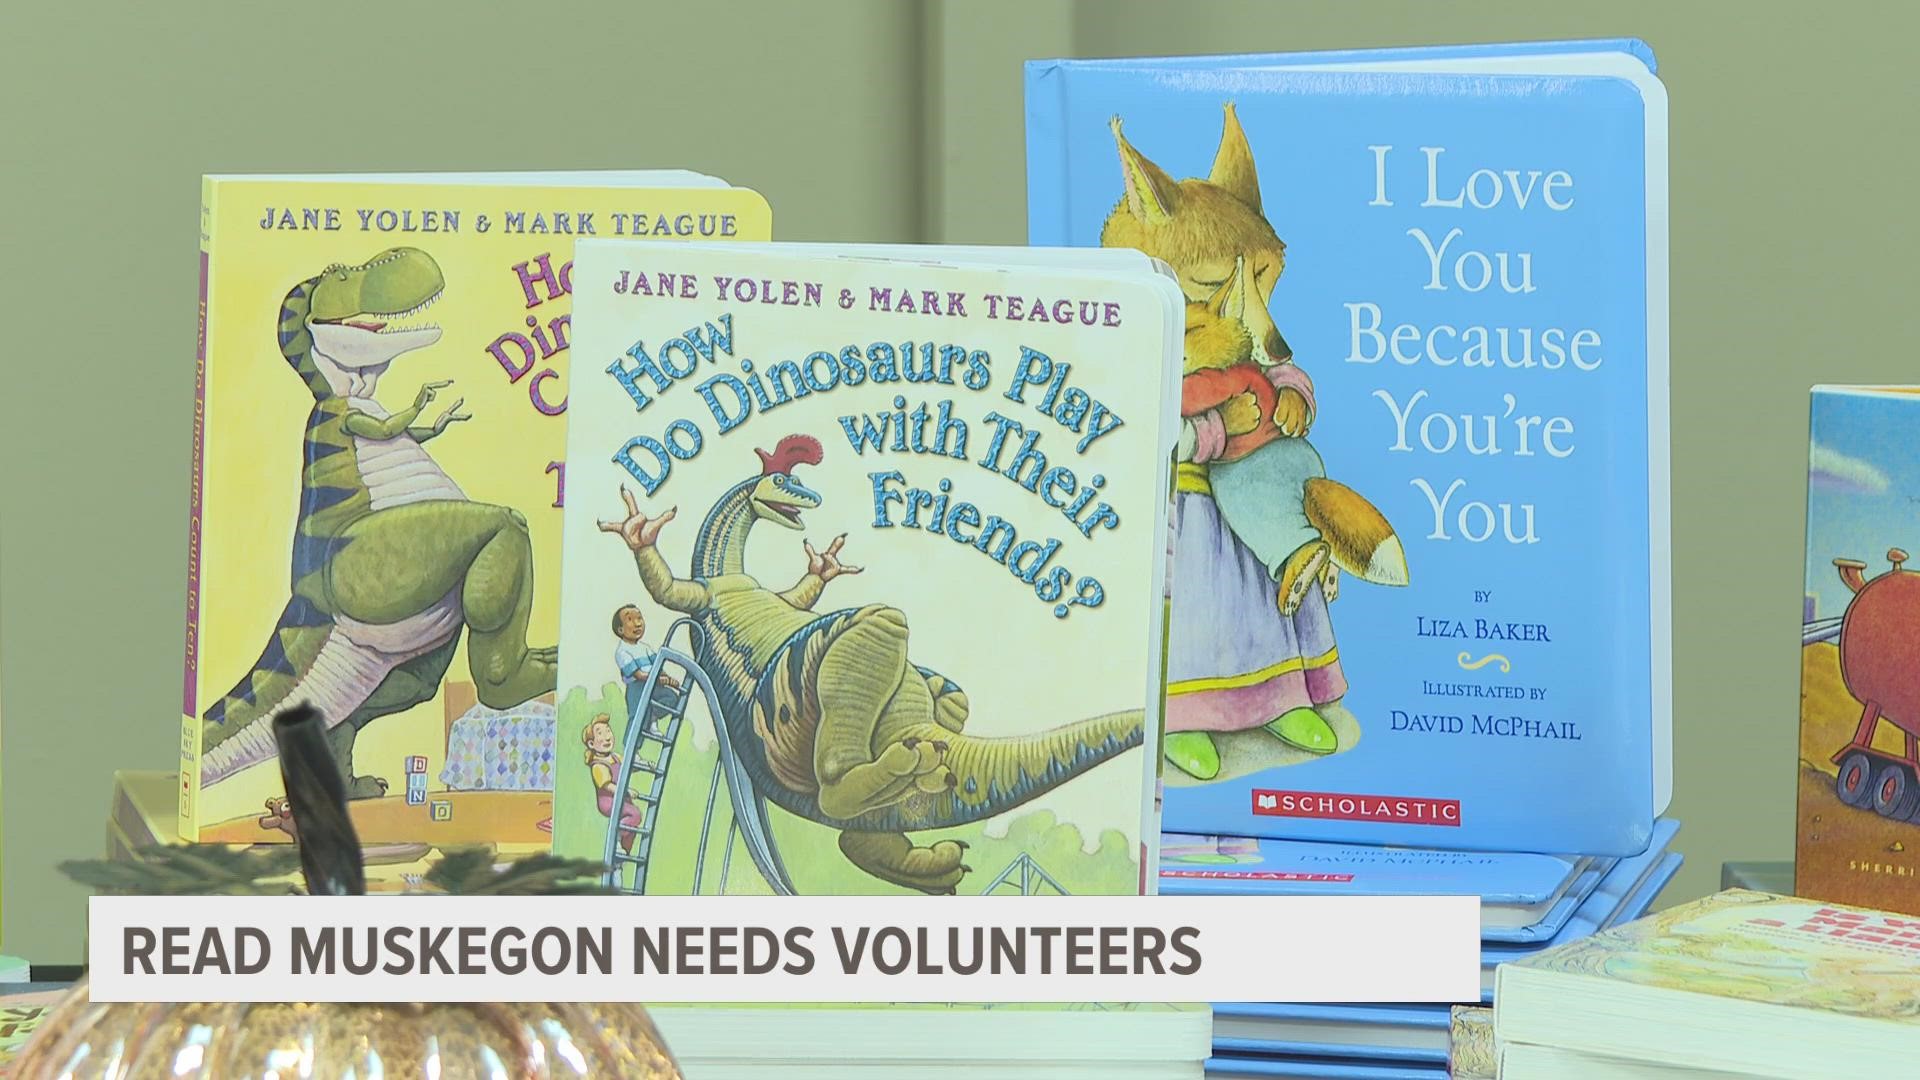 The group says one in six US adults reads at or below a 4th grade level. In Muskegon County, that means around 23,000 adults are considered functionally illiterate.